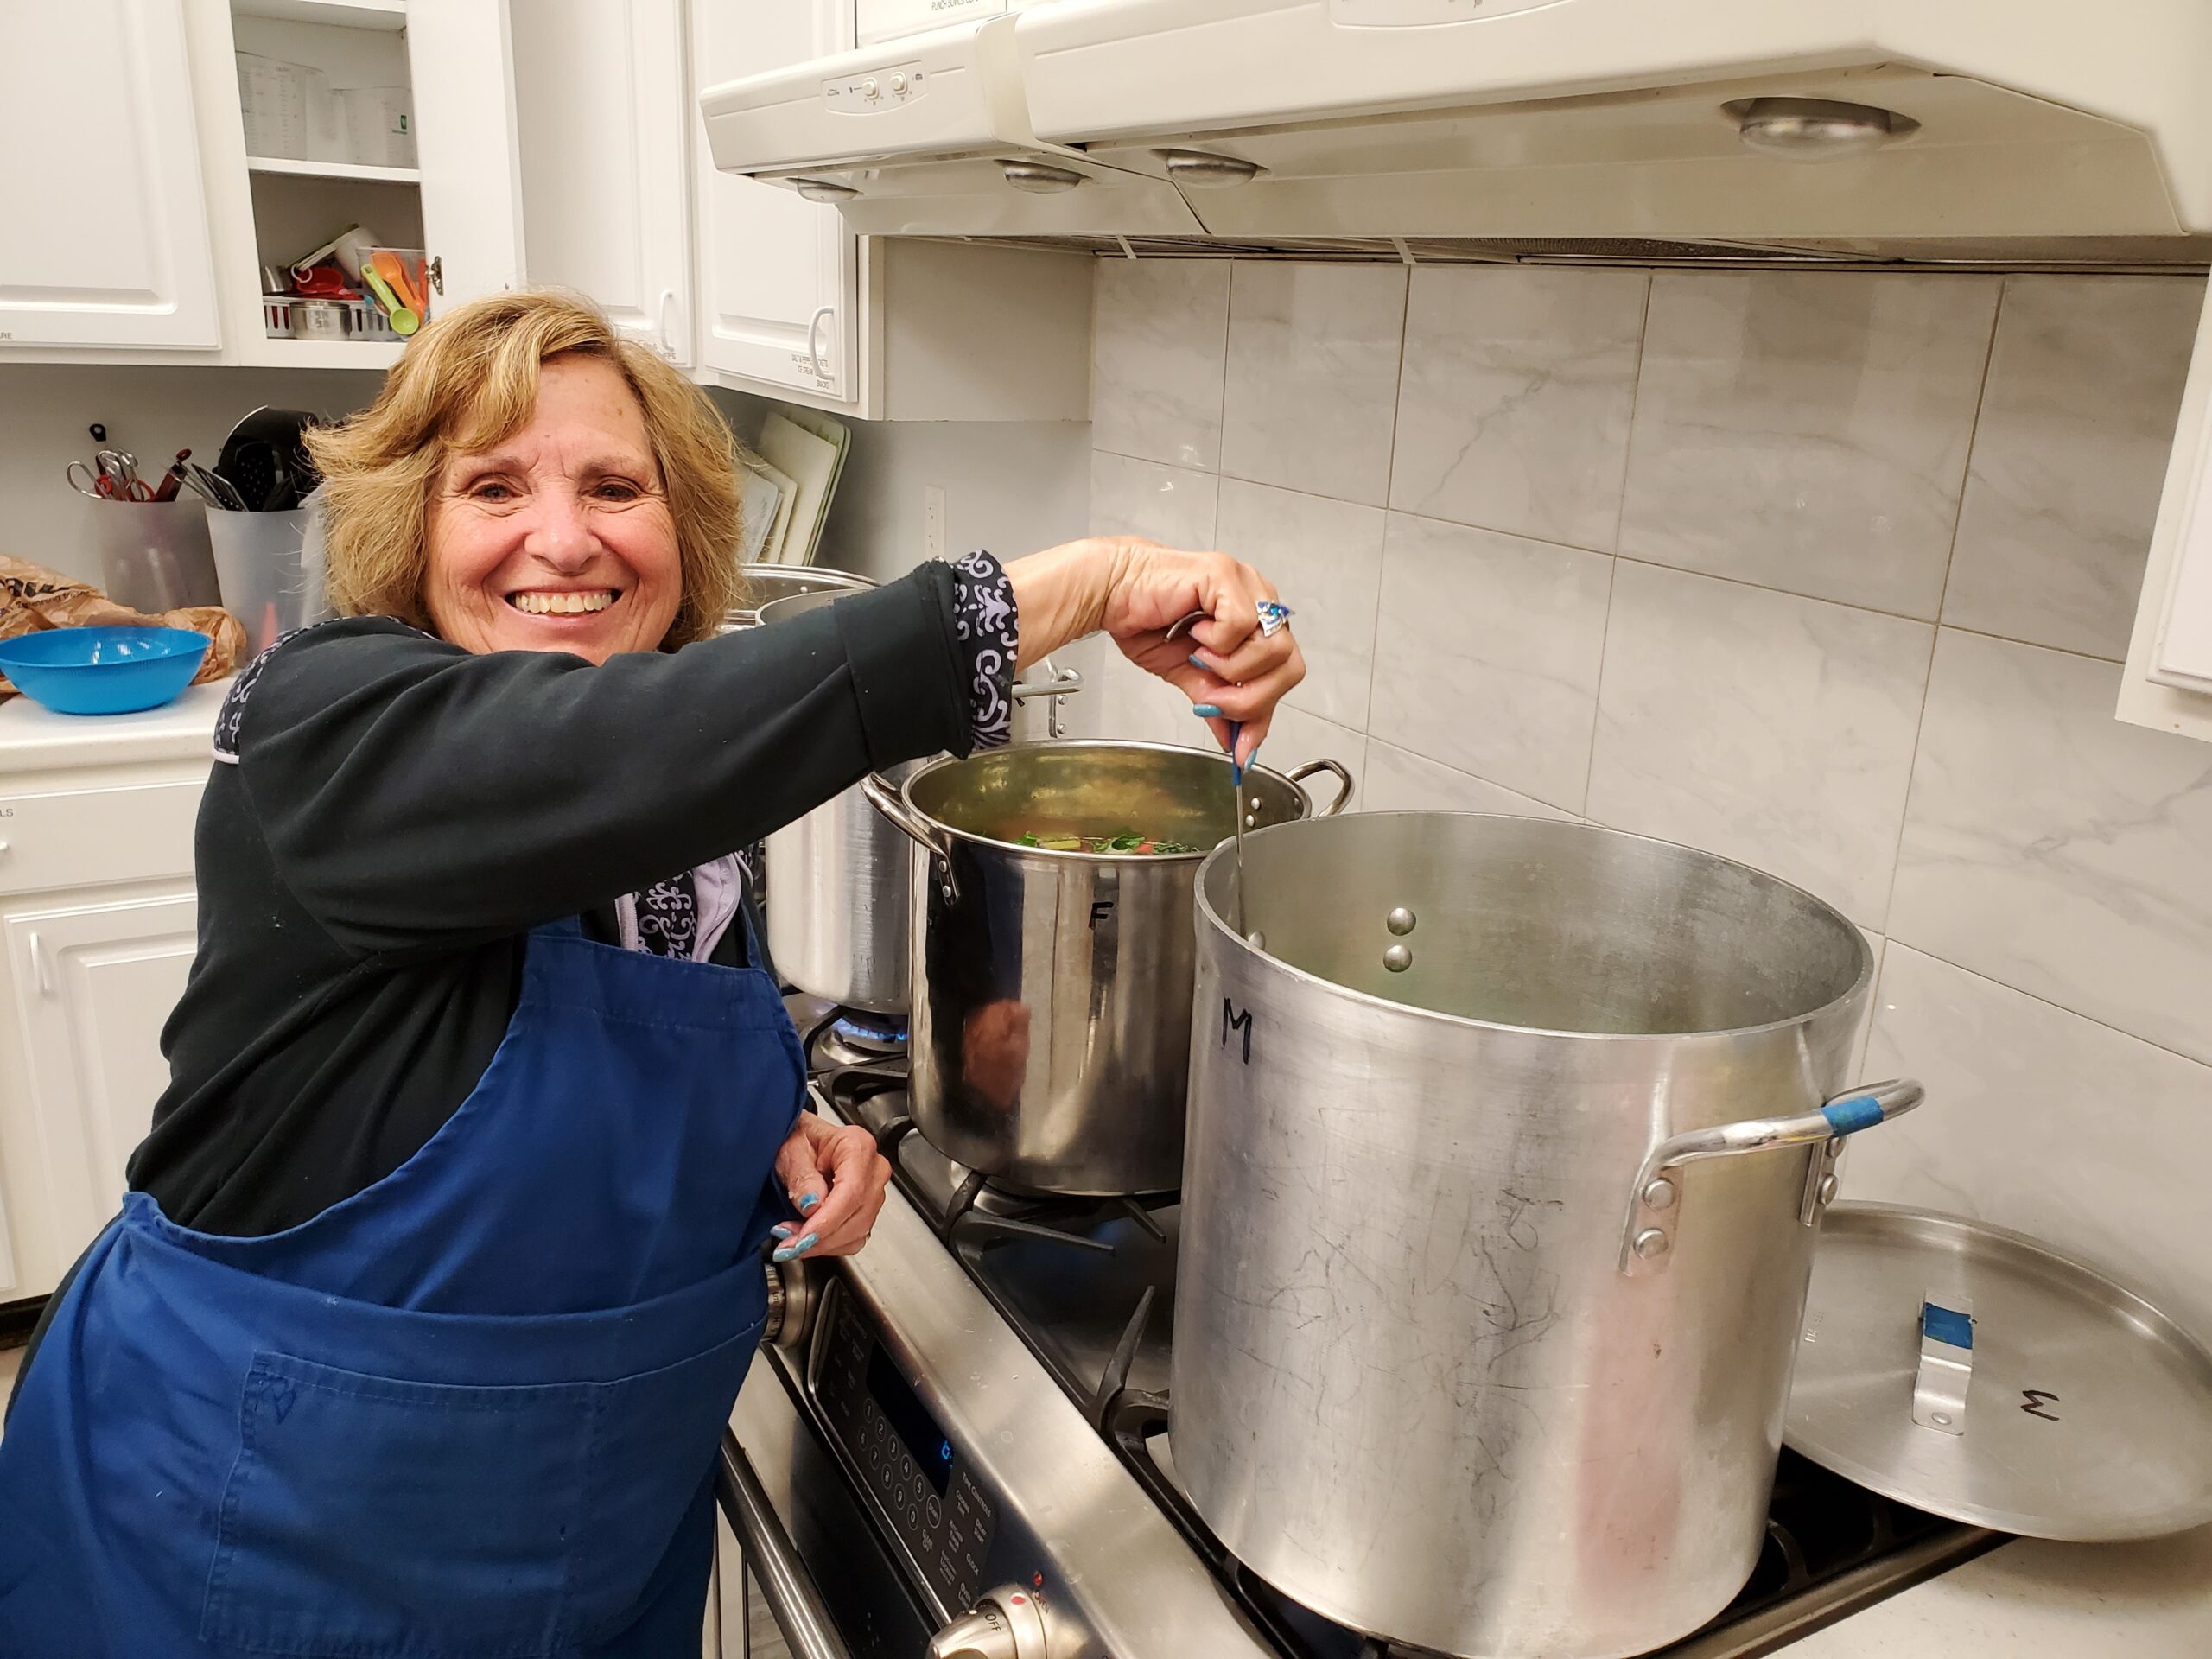 Stirring the Soup for Salvation Army